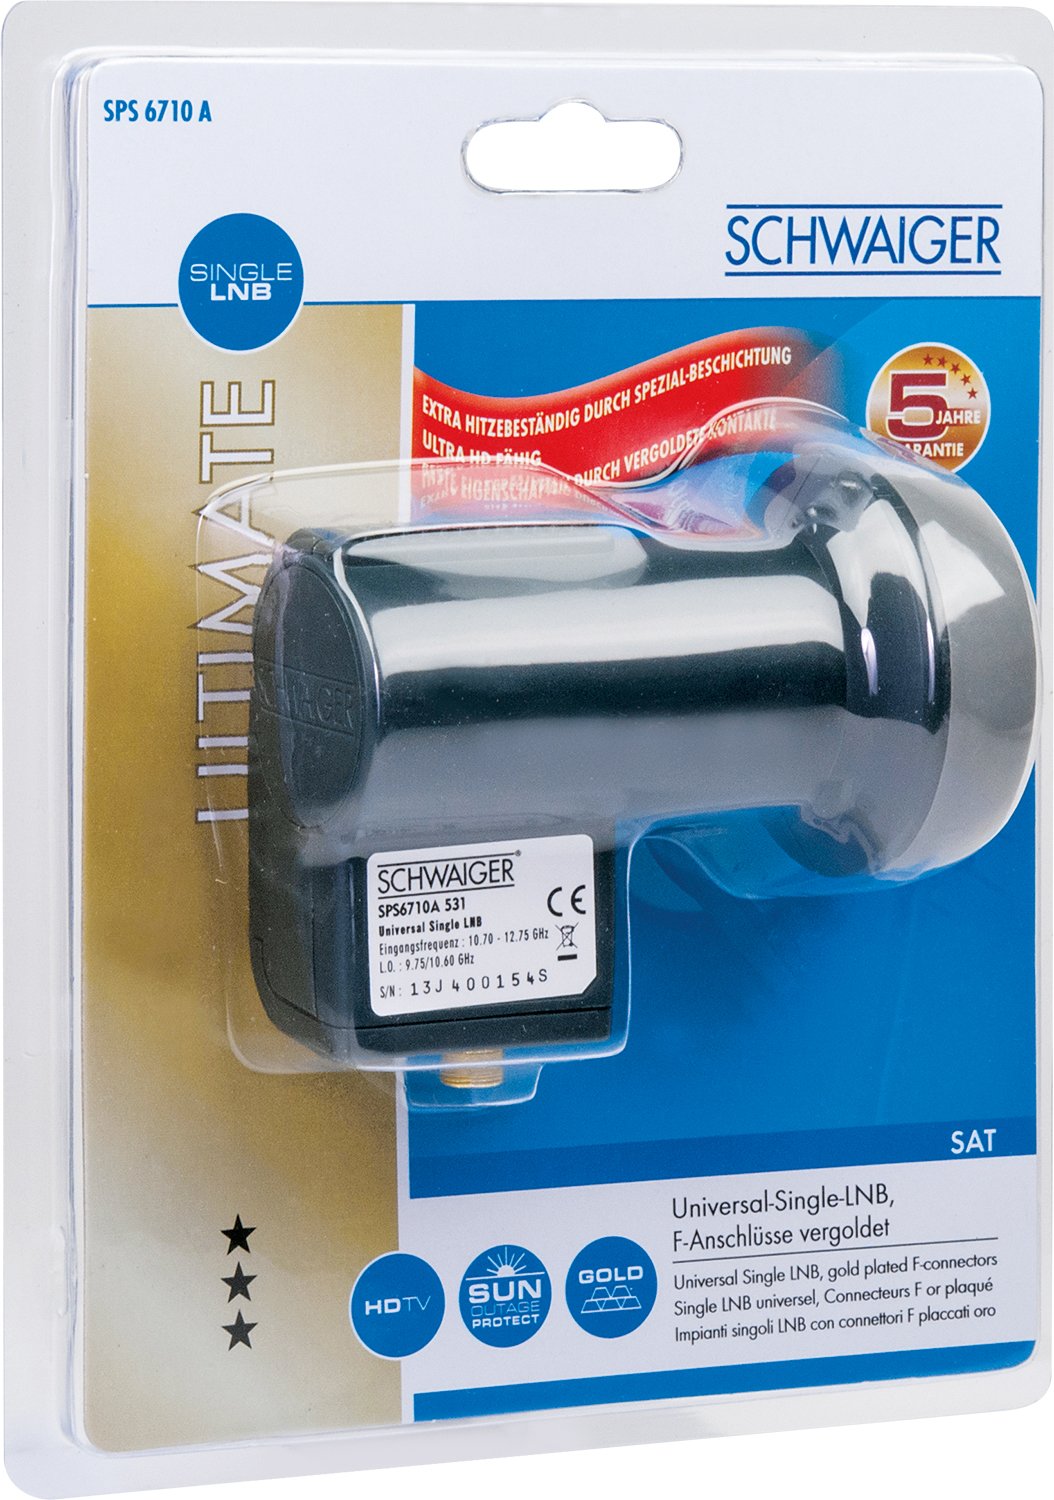 for multiswitches digital SCHWAIGER -395- Quattro LNB with Sun Protect multifeed-suitable with weather protection and gold-plated contacts extremely heat-resistant LNB cap